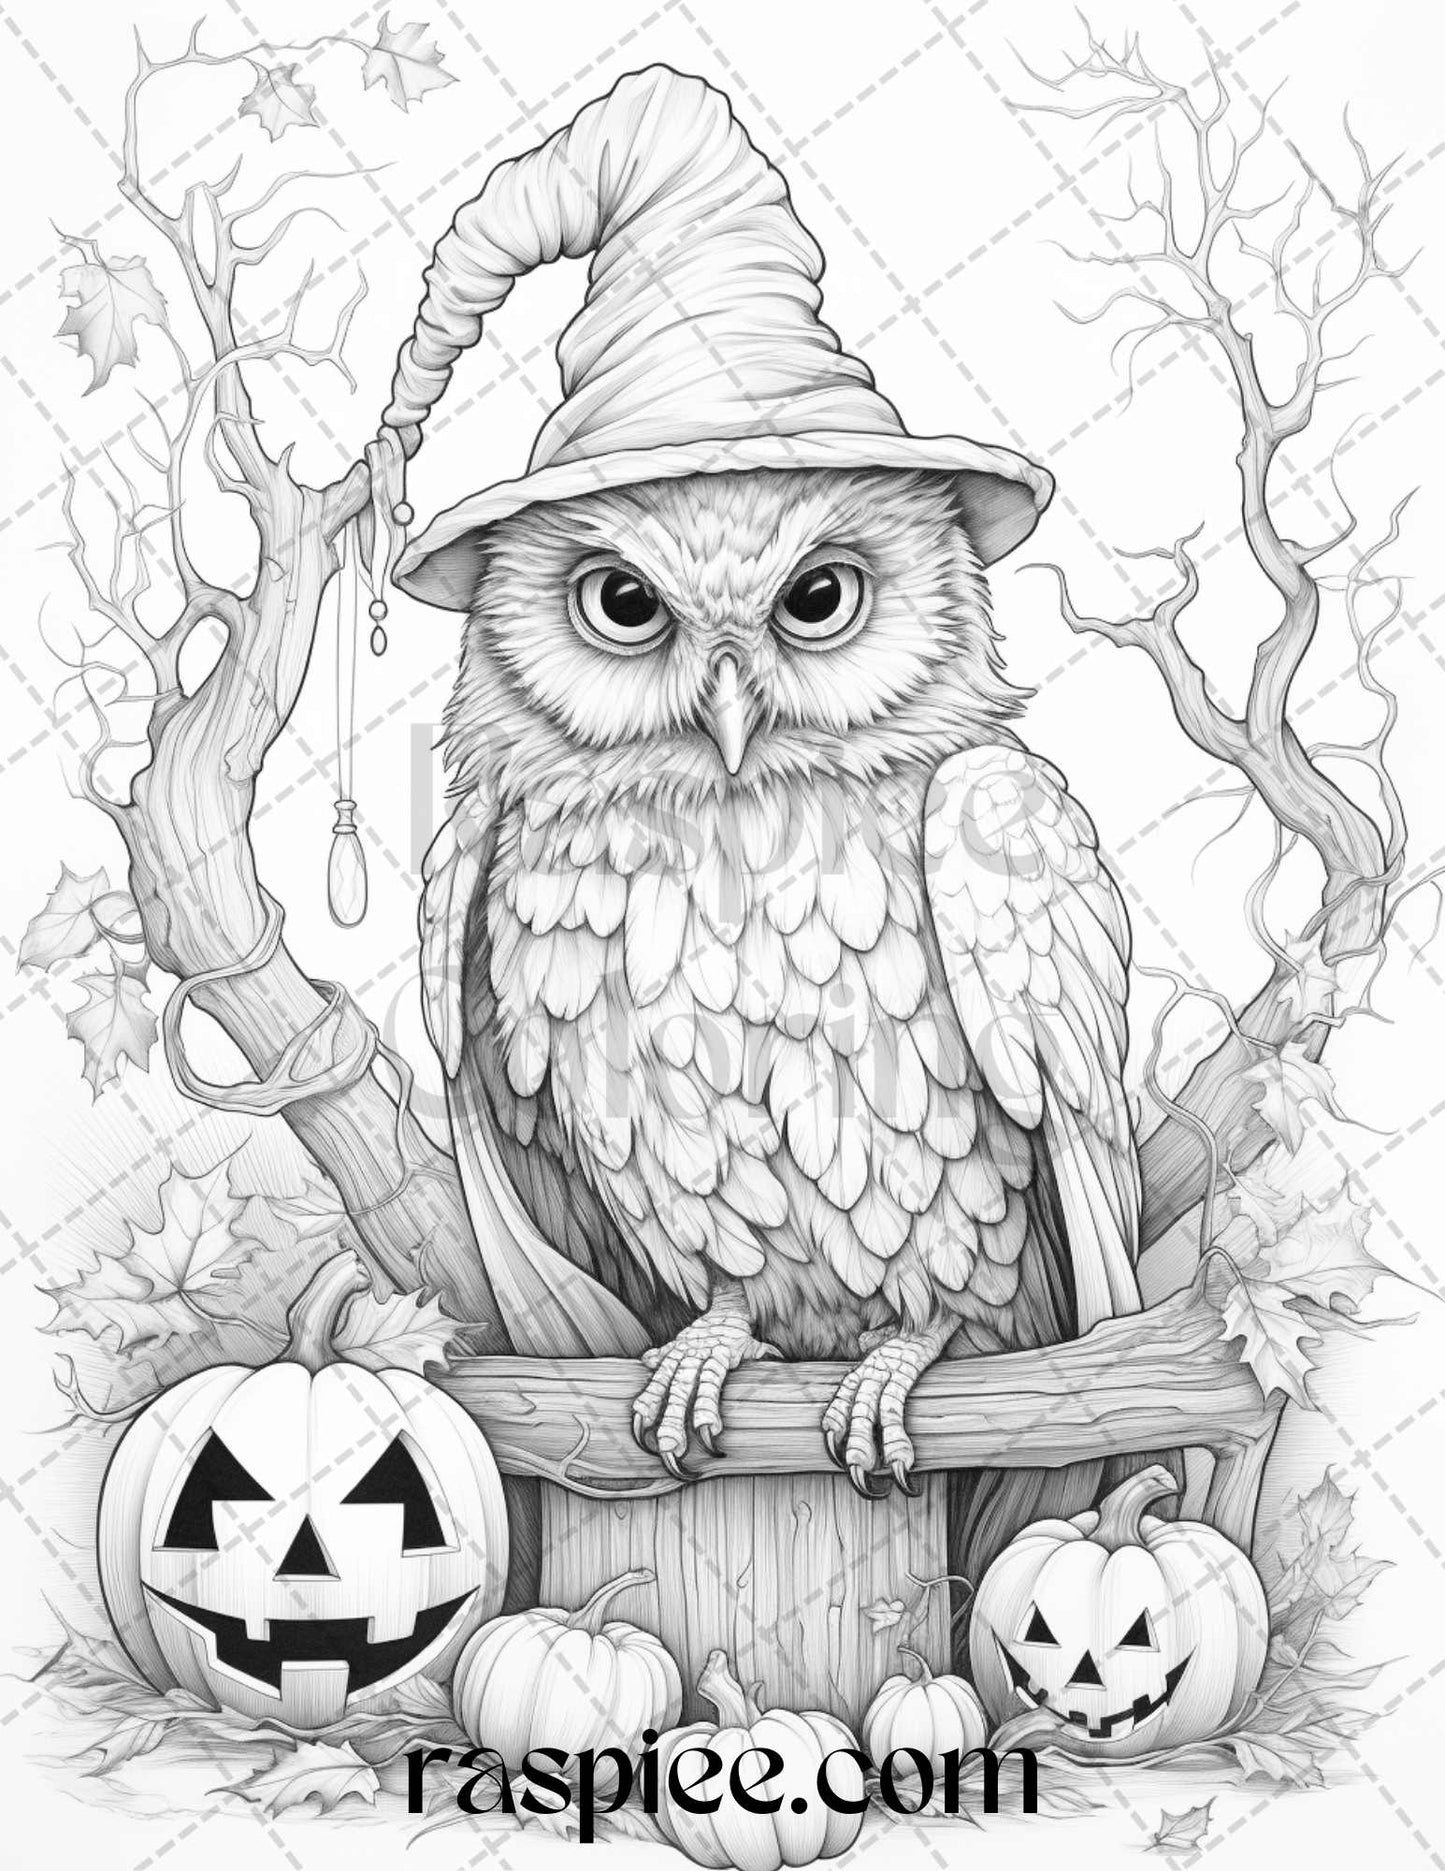 Halloween Witch Owl Grayscale Coloring Pages for Adults and Kids, Printable PDF Instant Download